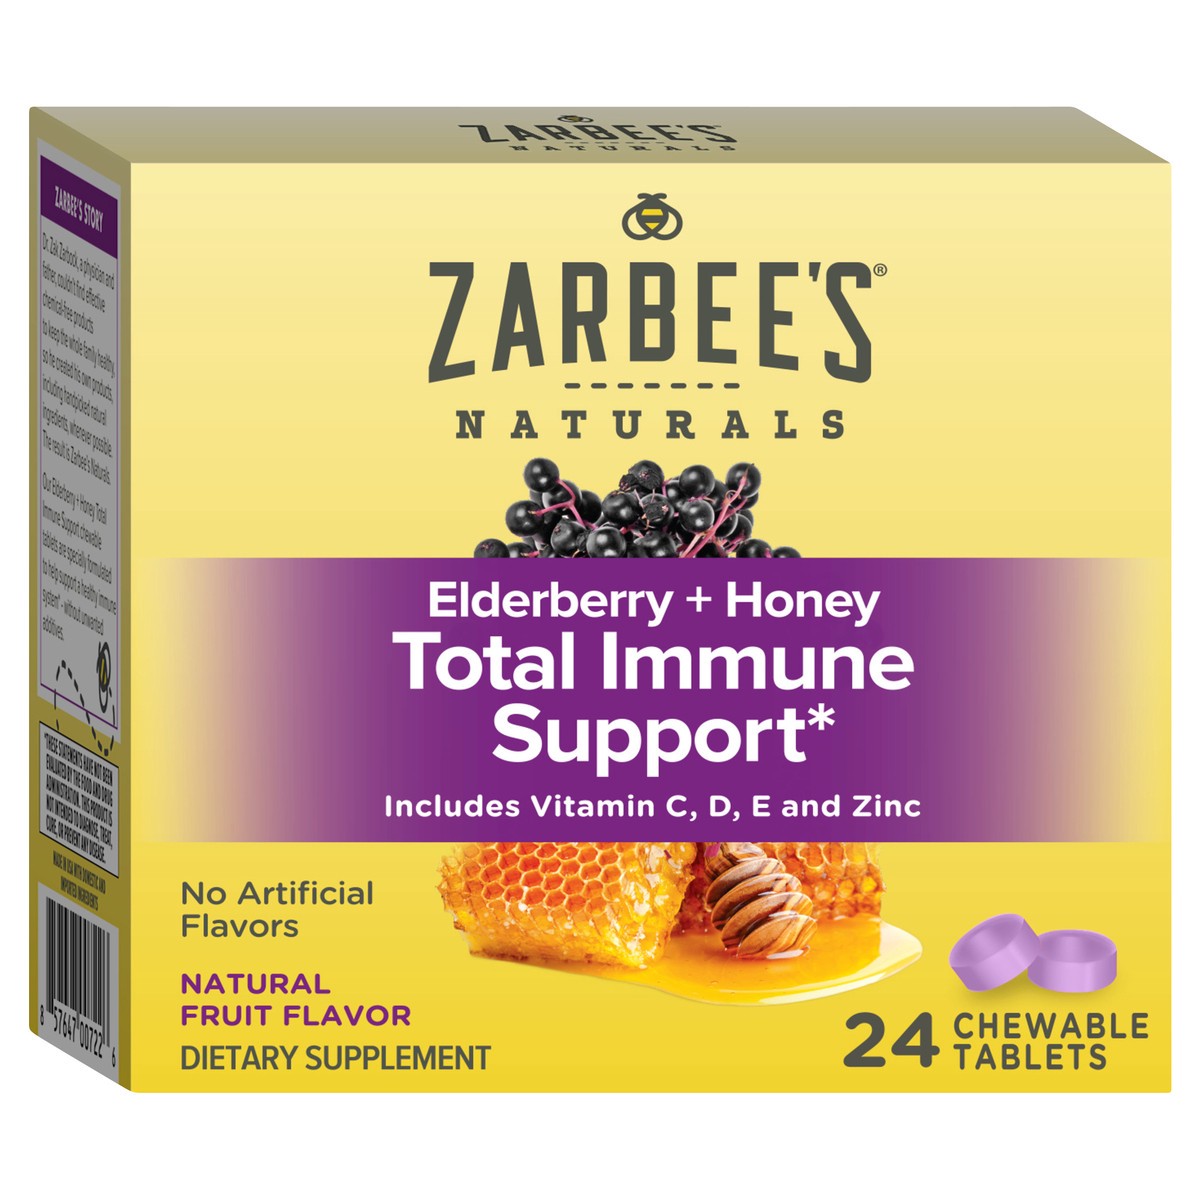 slide 2 of 7, Zarbee's Naturals Elderberry + Honey Total Immune Support Daily Chewable Tablets, 24 ct, 24 ct